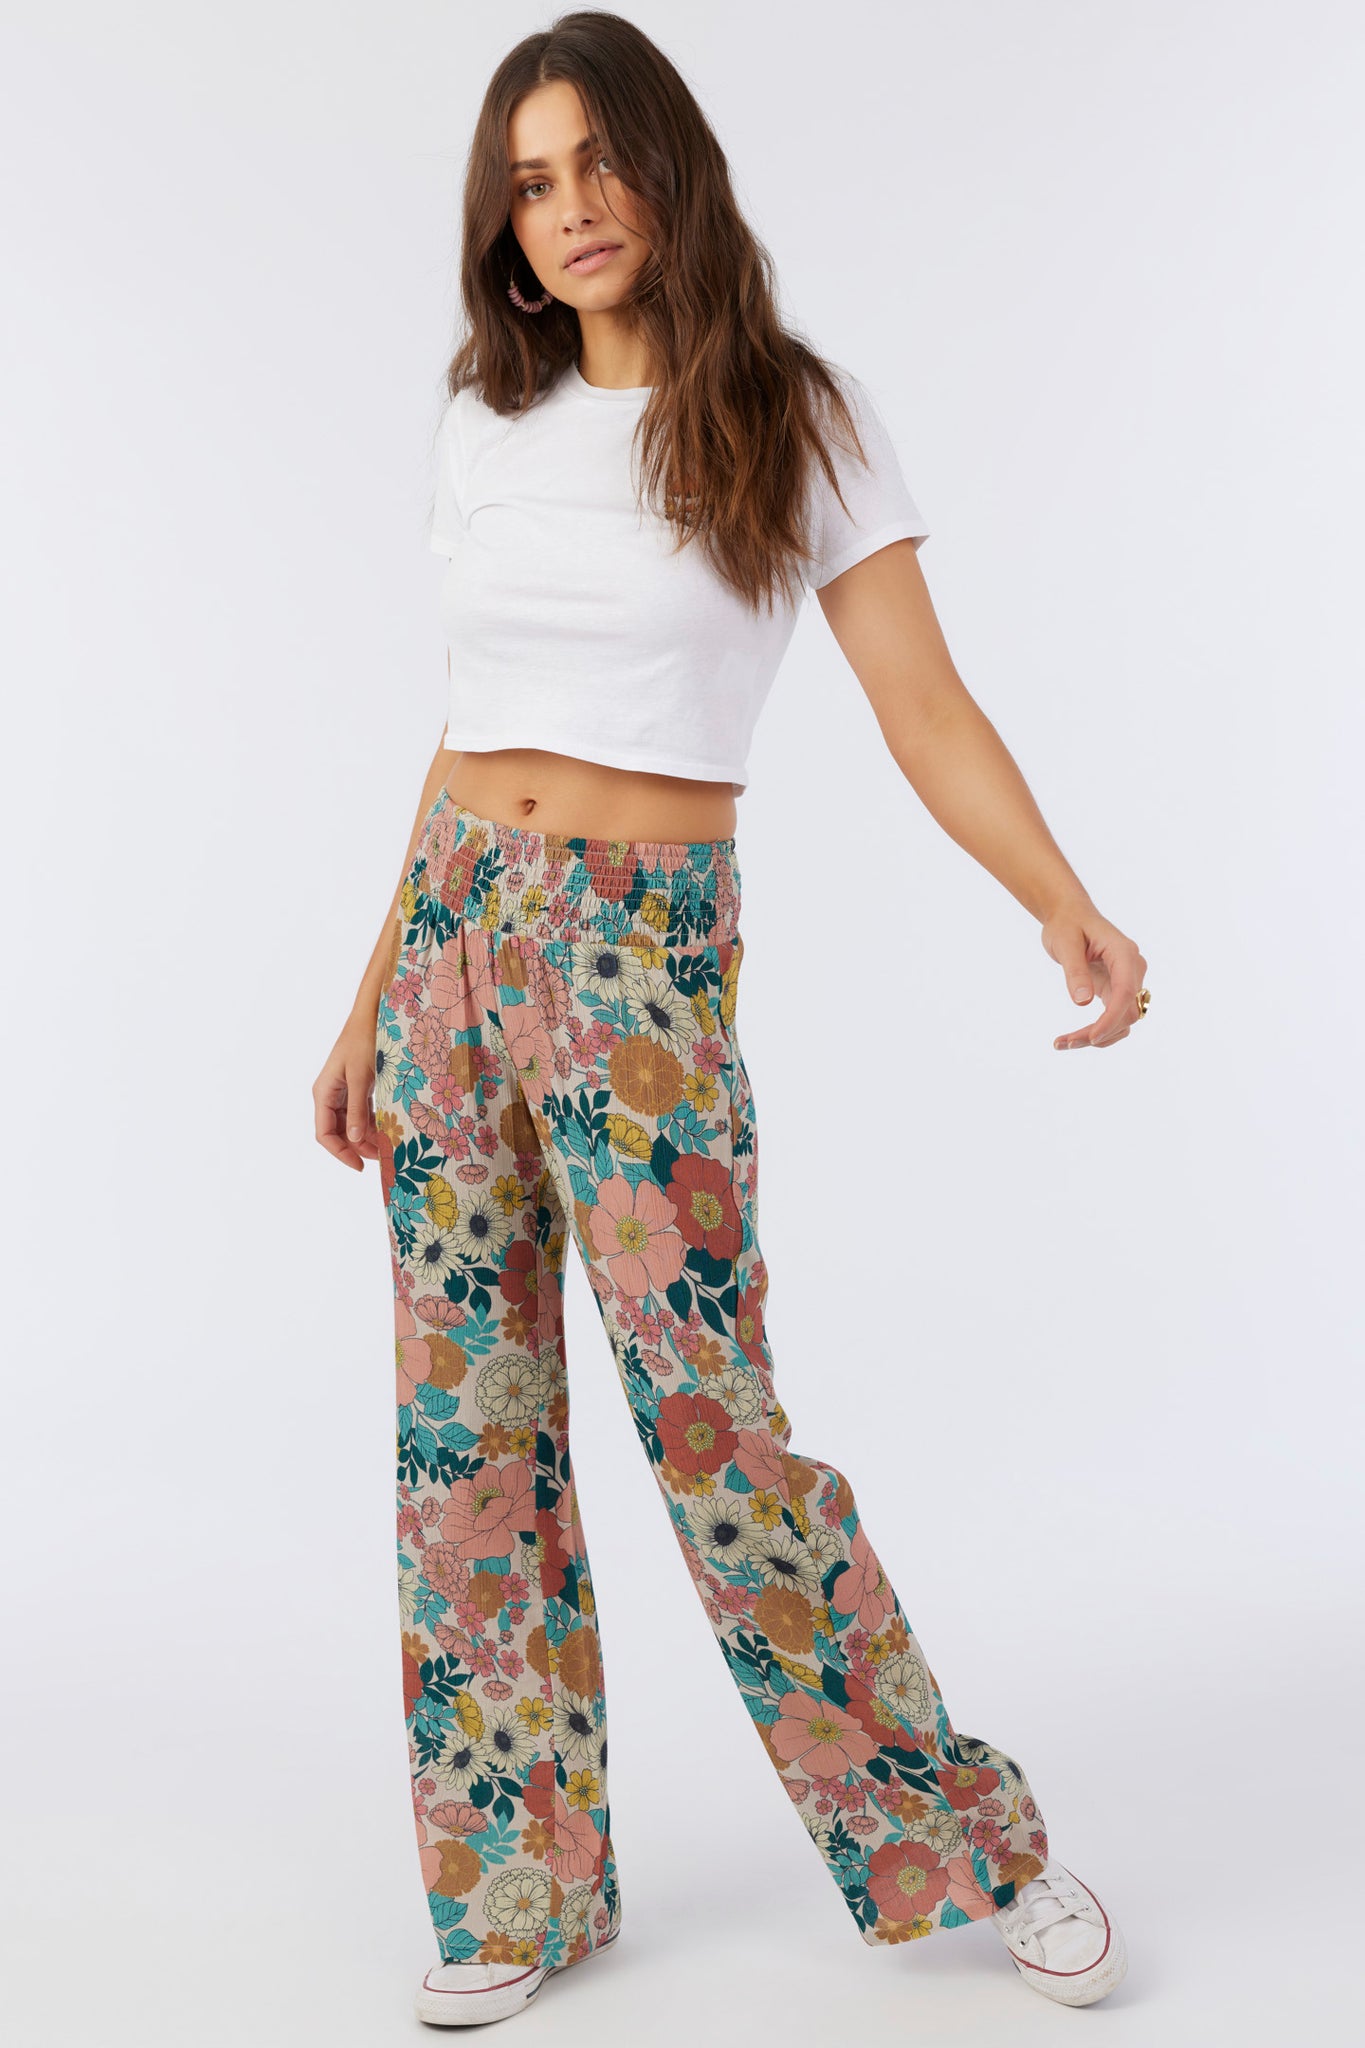 Johnny Tenley Floral Beach Pants - Multi Colored